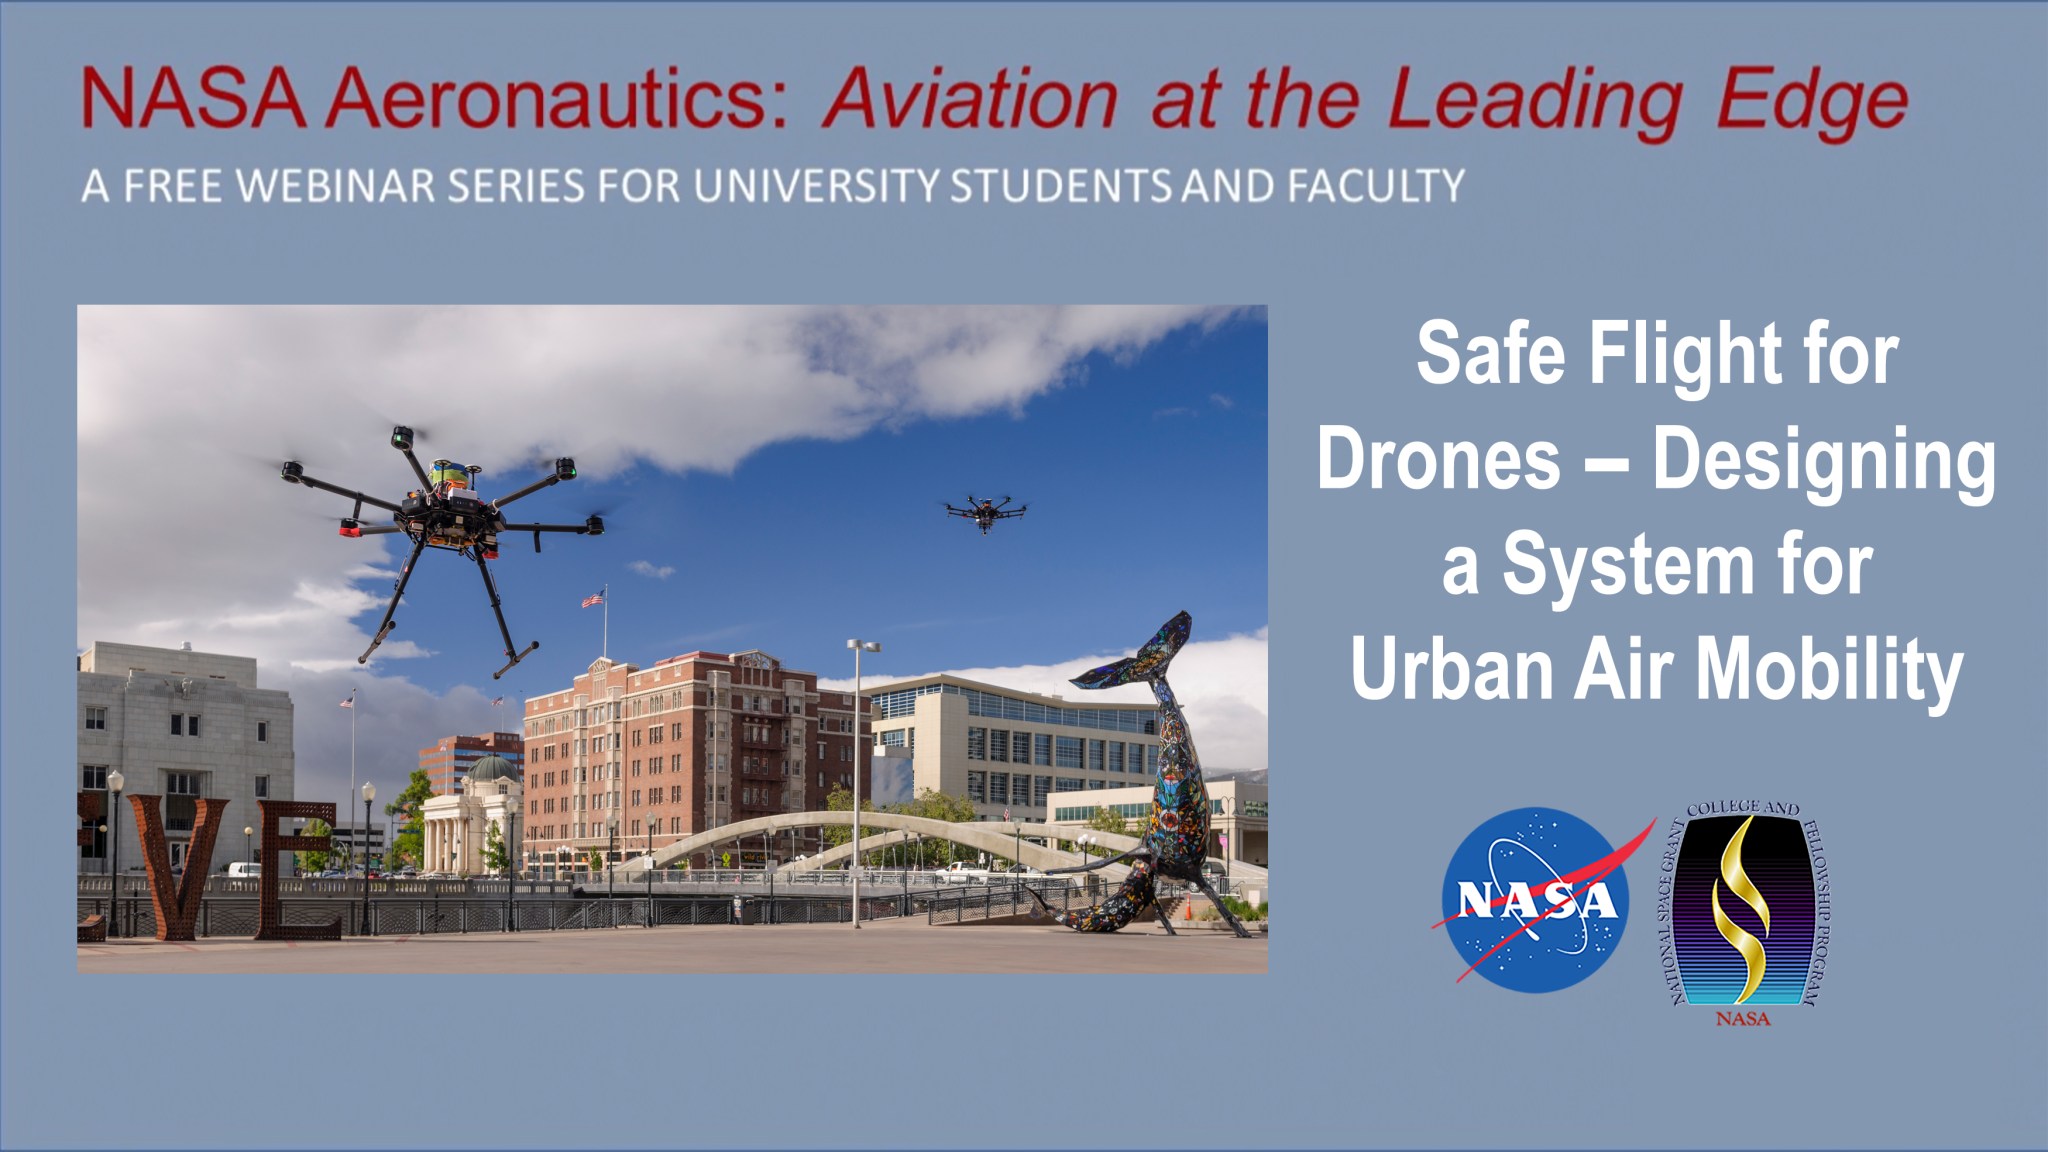 NASA Aeronautics: Aviation at the Leading Edge Webinar: Safe Flight for Drones-Designing a System for Urban Air Mobility